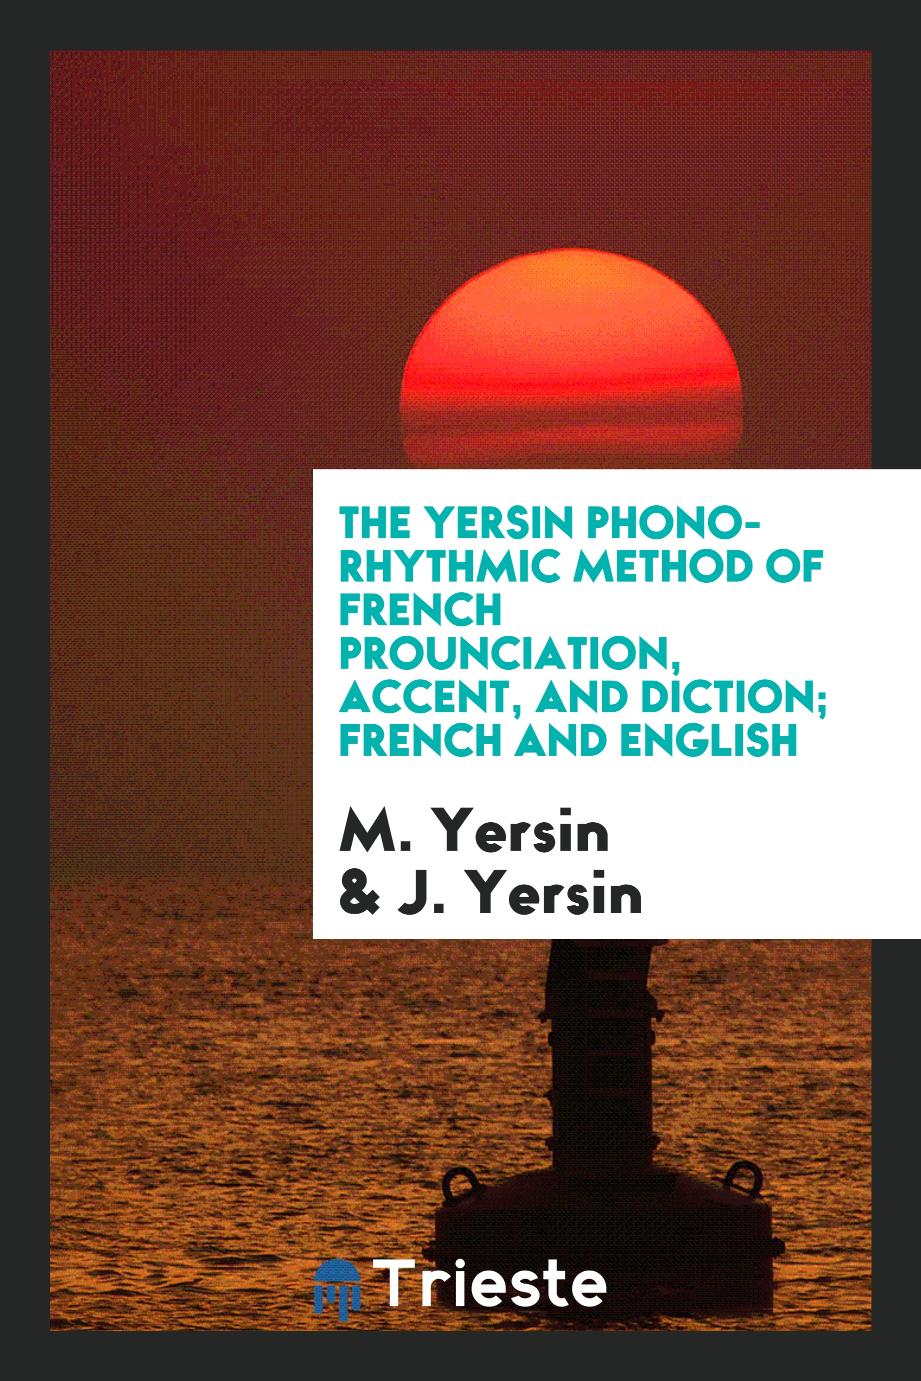 The Yersin Phono-Rhythmic Method of French Prounciation, Accent, and Diction; French and English